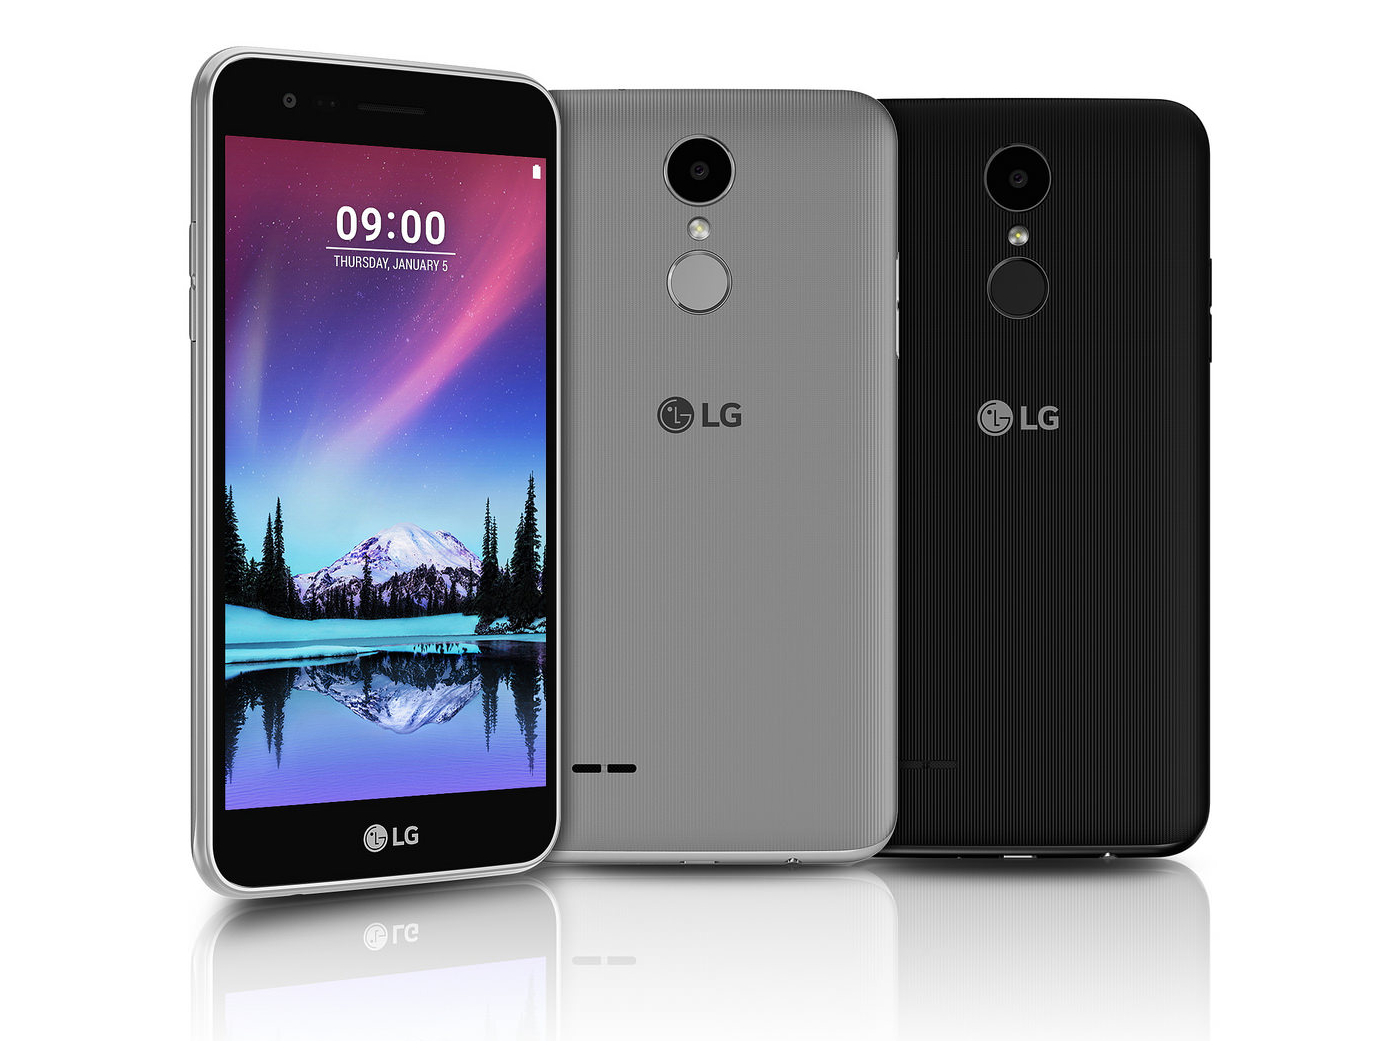 Image From Lg Announces The Stylo 3 , Plus New K10, - Lg K4 Price In Pakistan , HD Wallpaper & Backgrounds